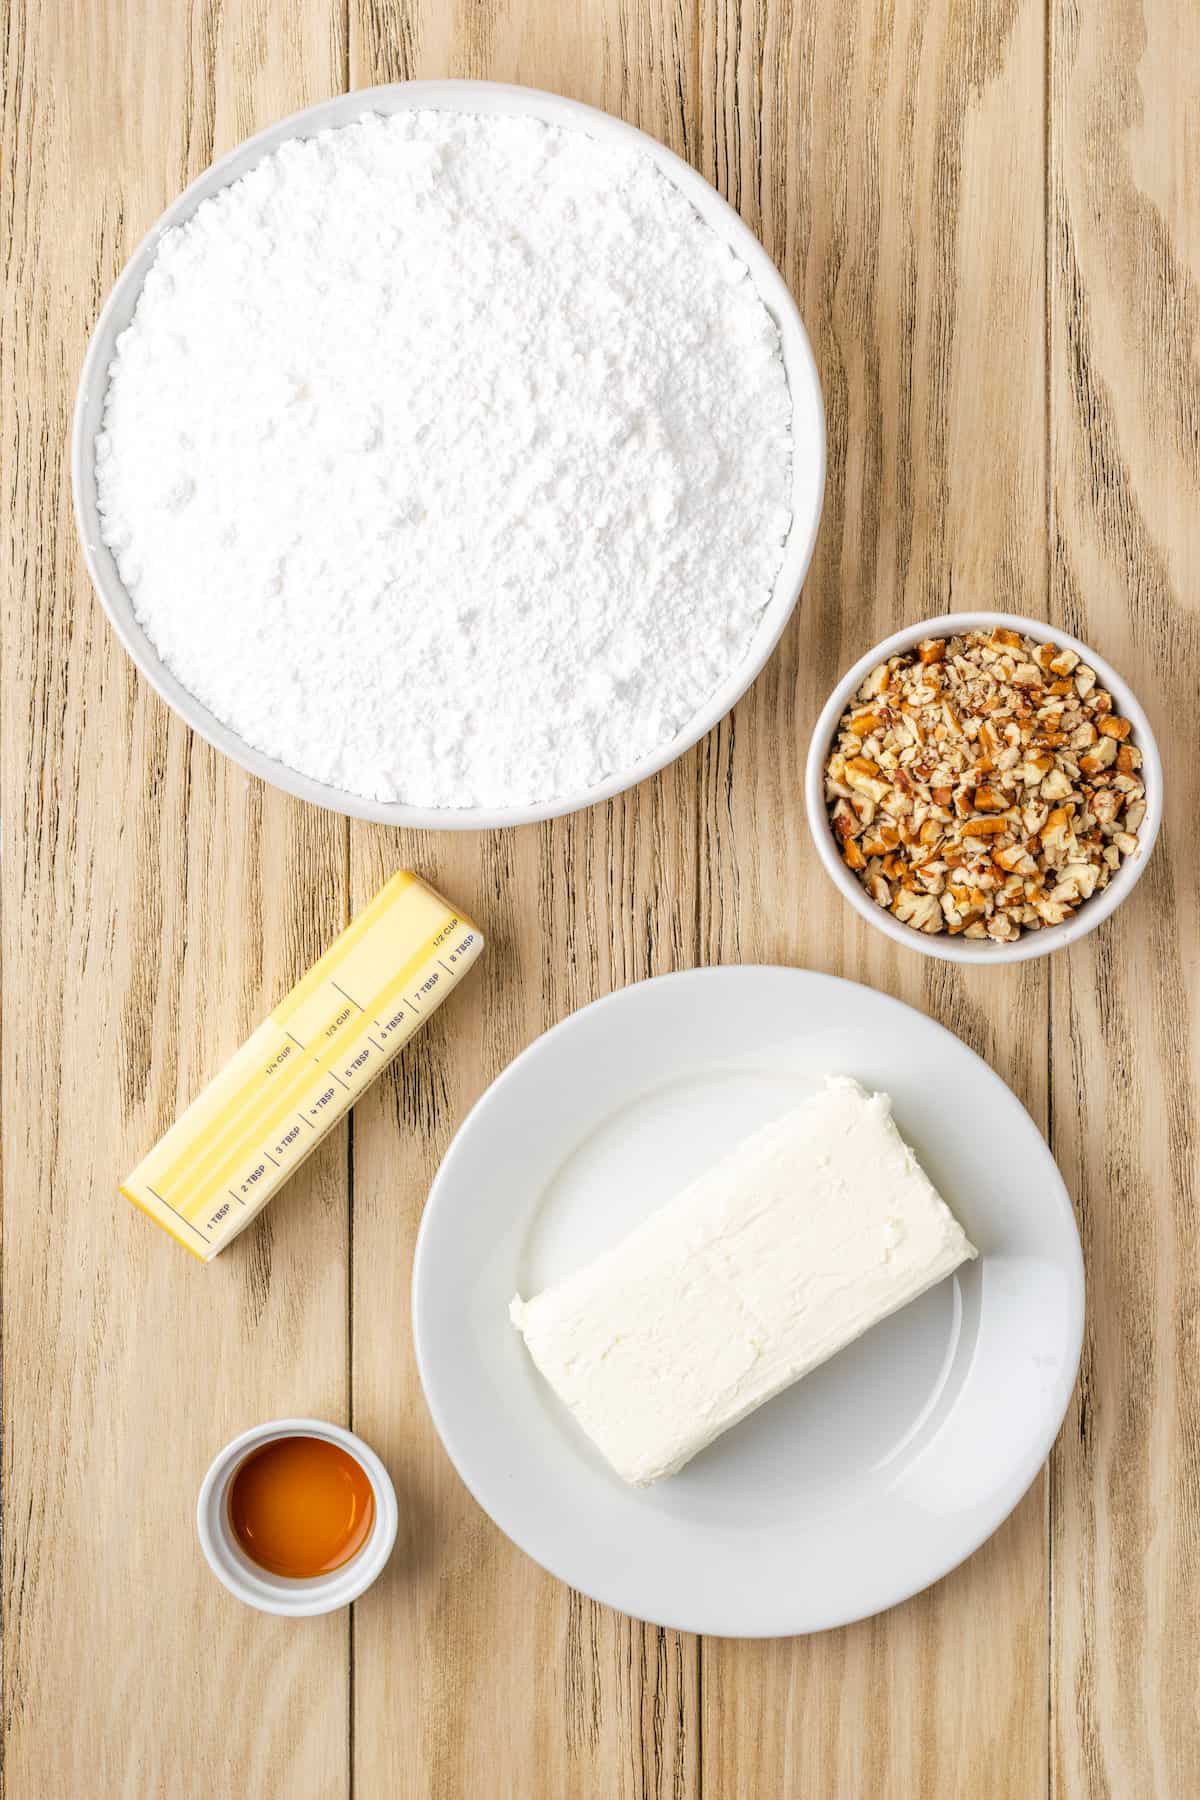 The ingredients for cream cheese frosting.